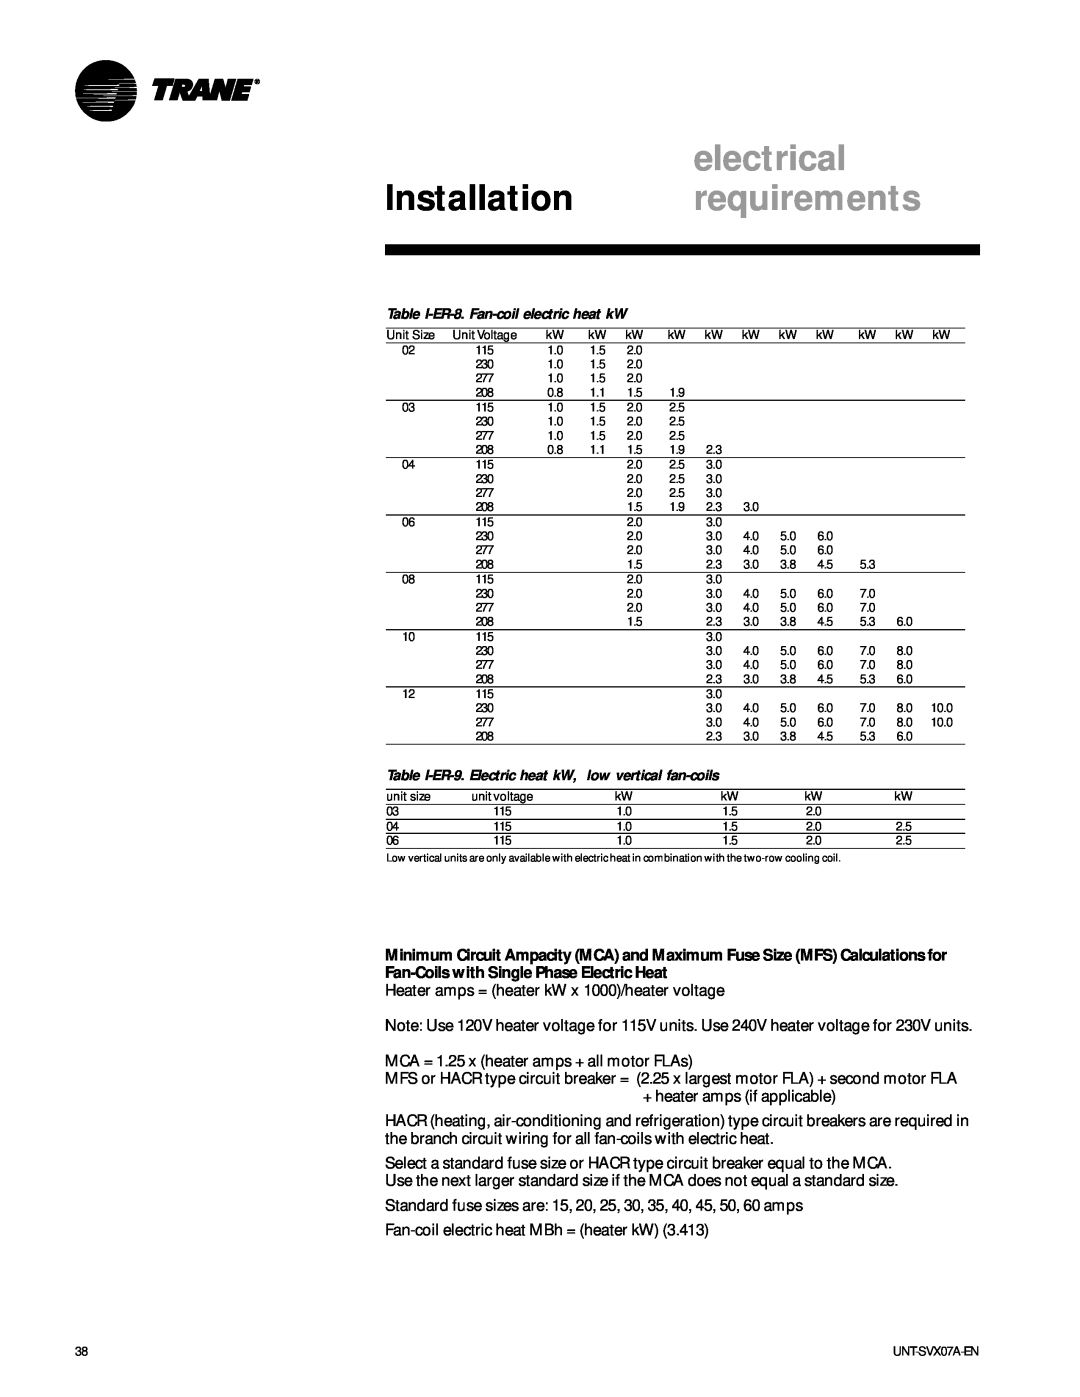 Trane UNT-SVX07A-EN manual electrical, Installation requirements, Heater amps = heater kW x 1000/heater voltage 